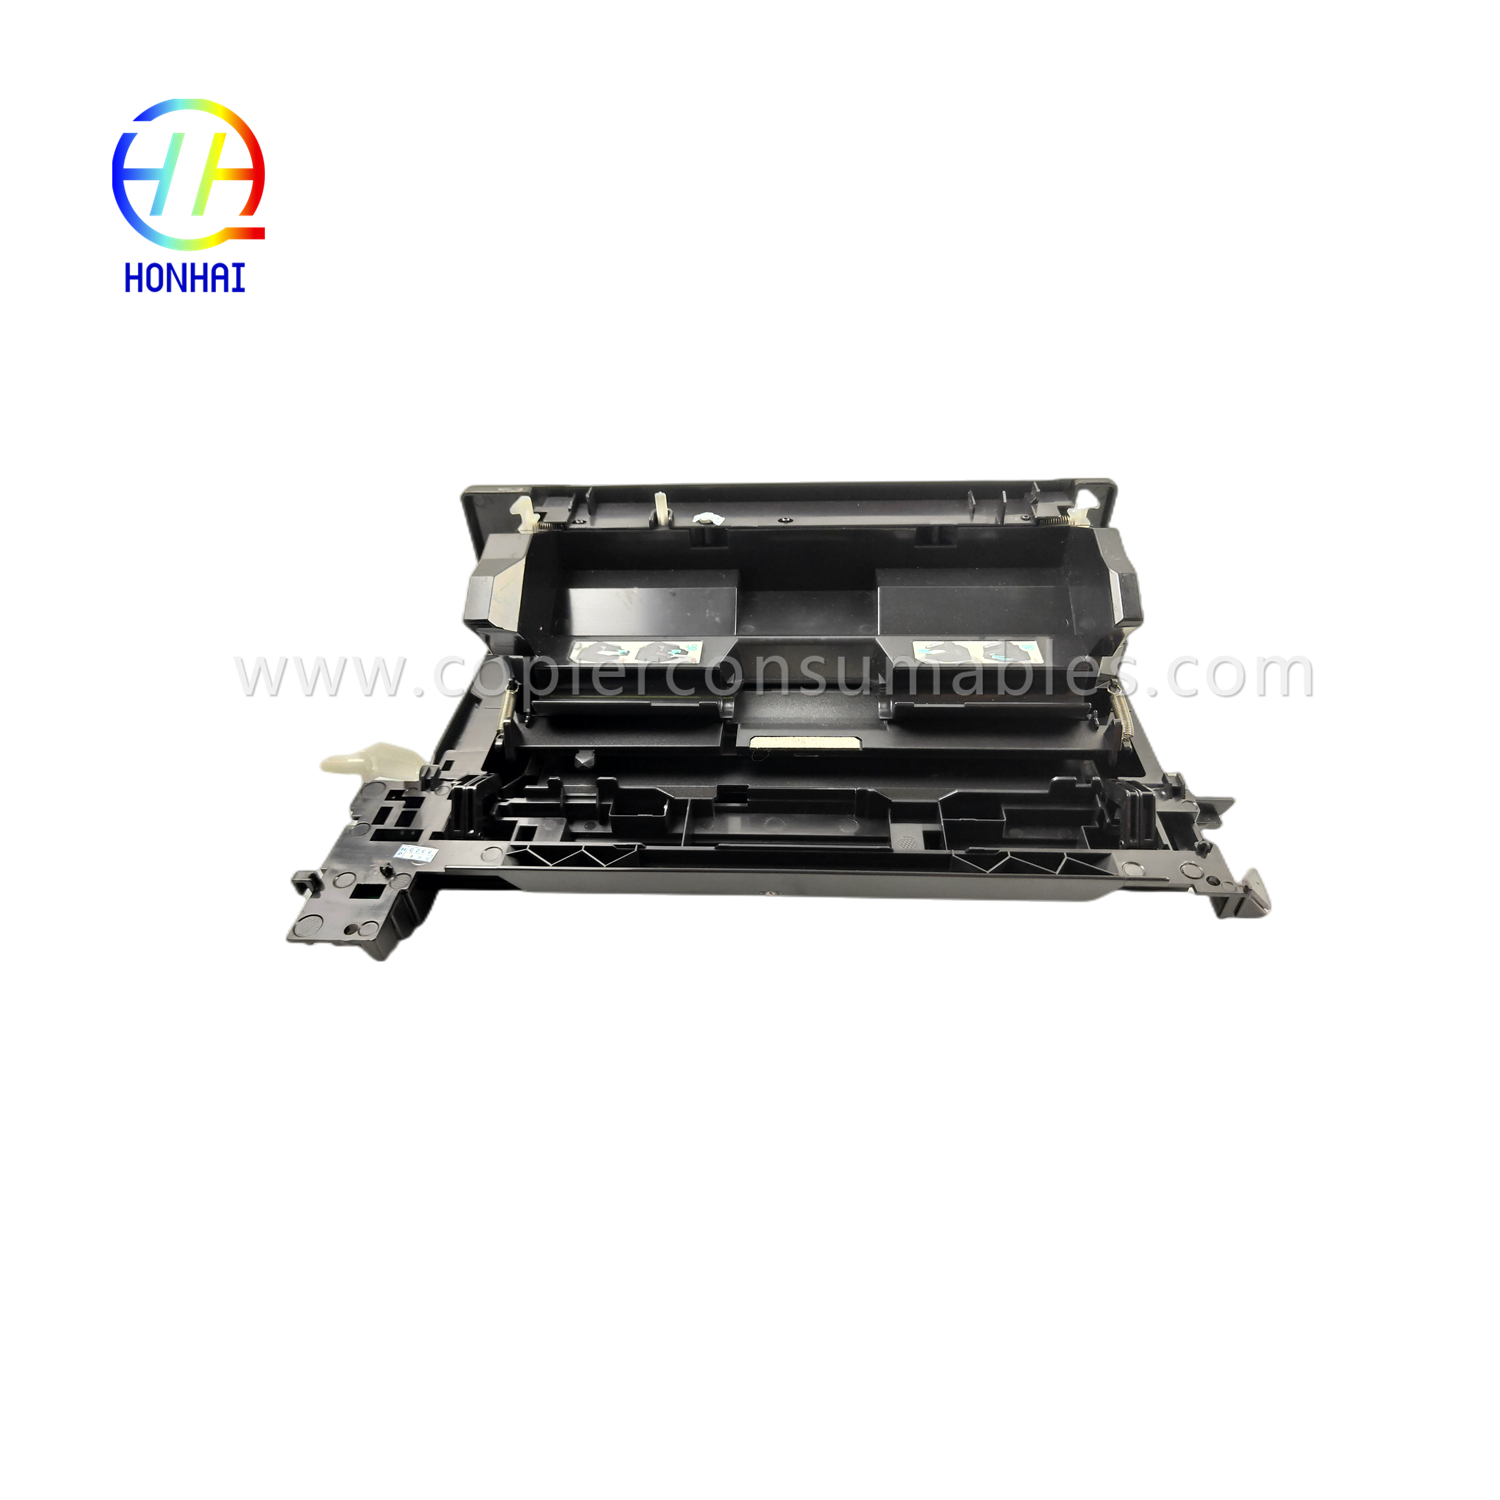 https://c585.goodo.net/front-door-for-hp-pro400-m401-hp401dne-401d-first-tray-manual-feeder-front-cover-product/